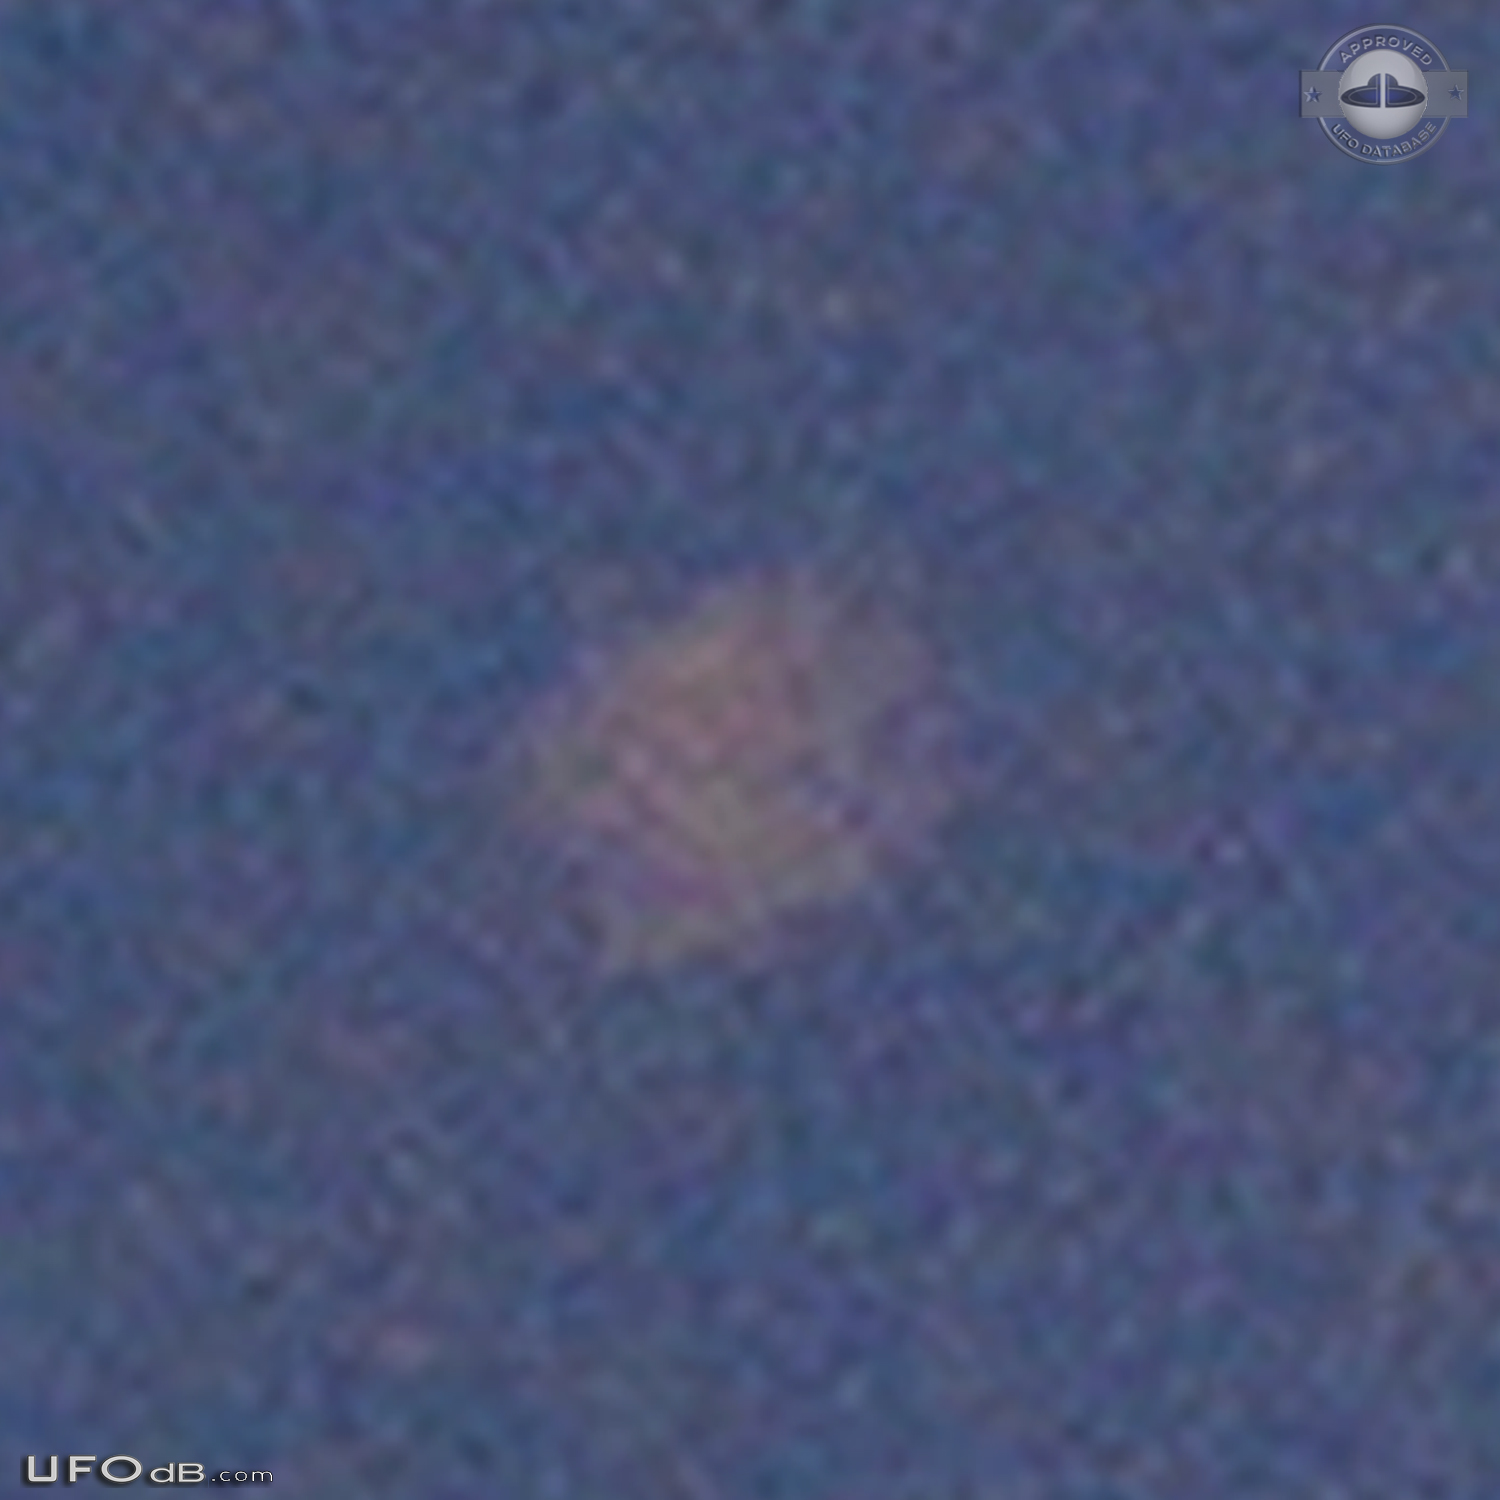 noticed a light passing under the moon in Pendleton Indiana USA 2015 UFO Picture #714-5